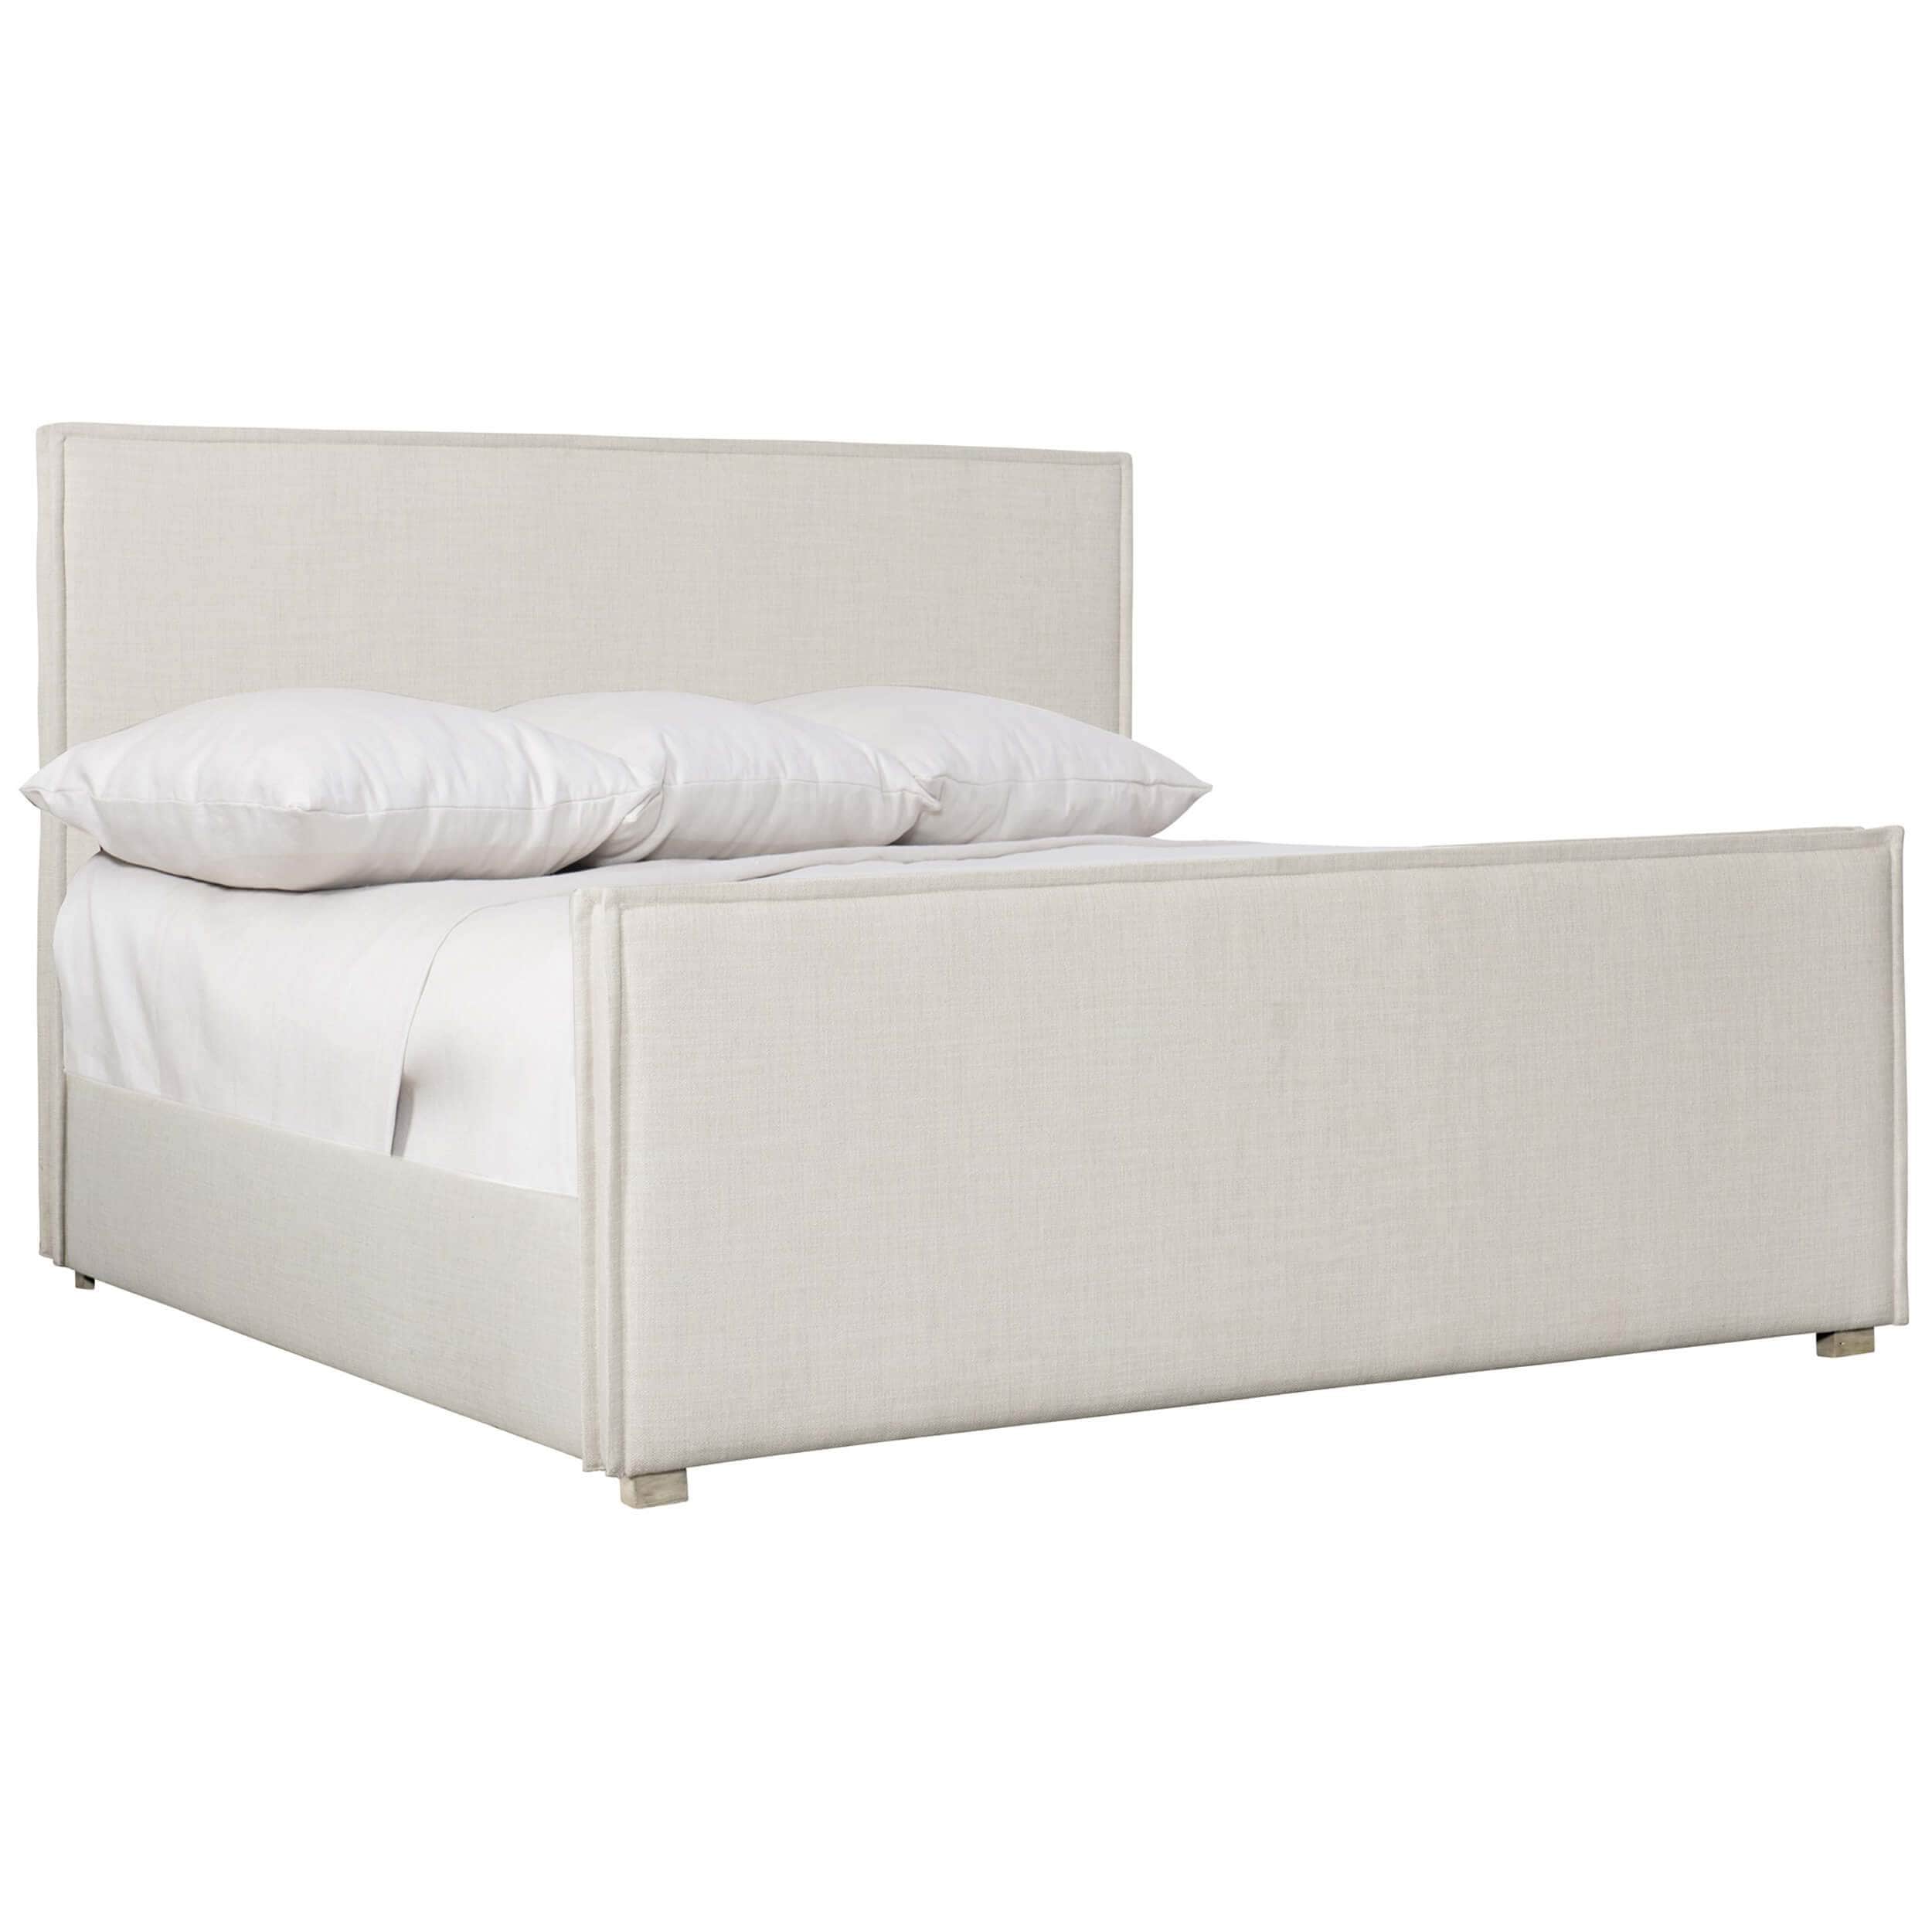 Image of Sawyer Upholstered Bed